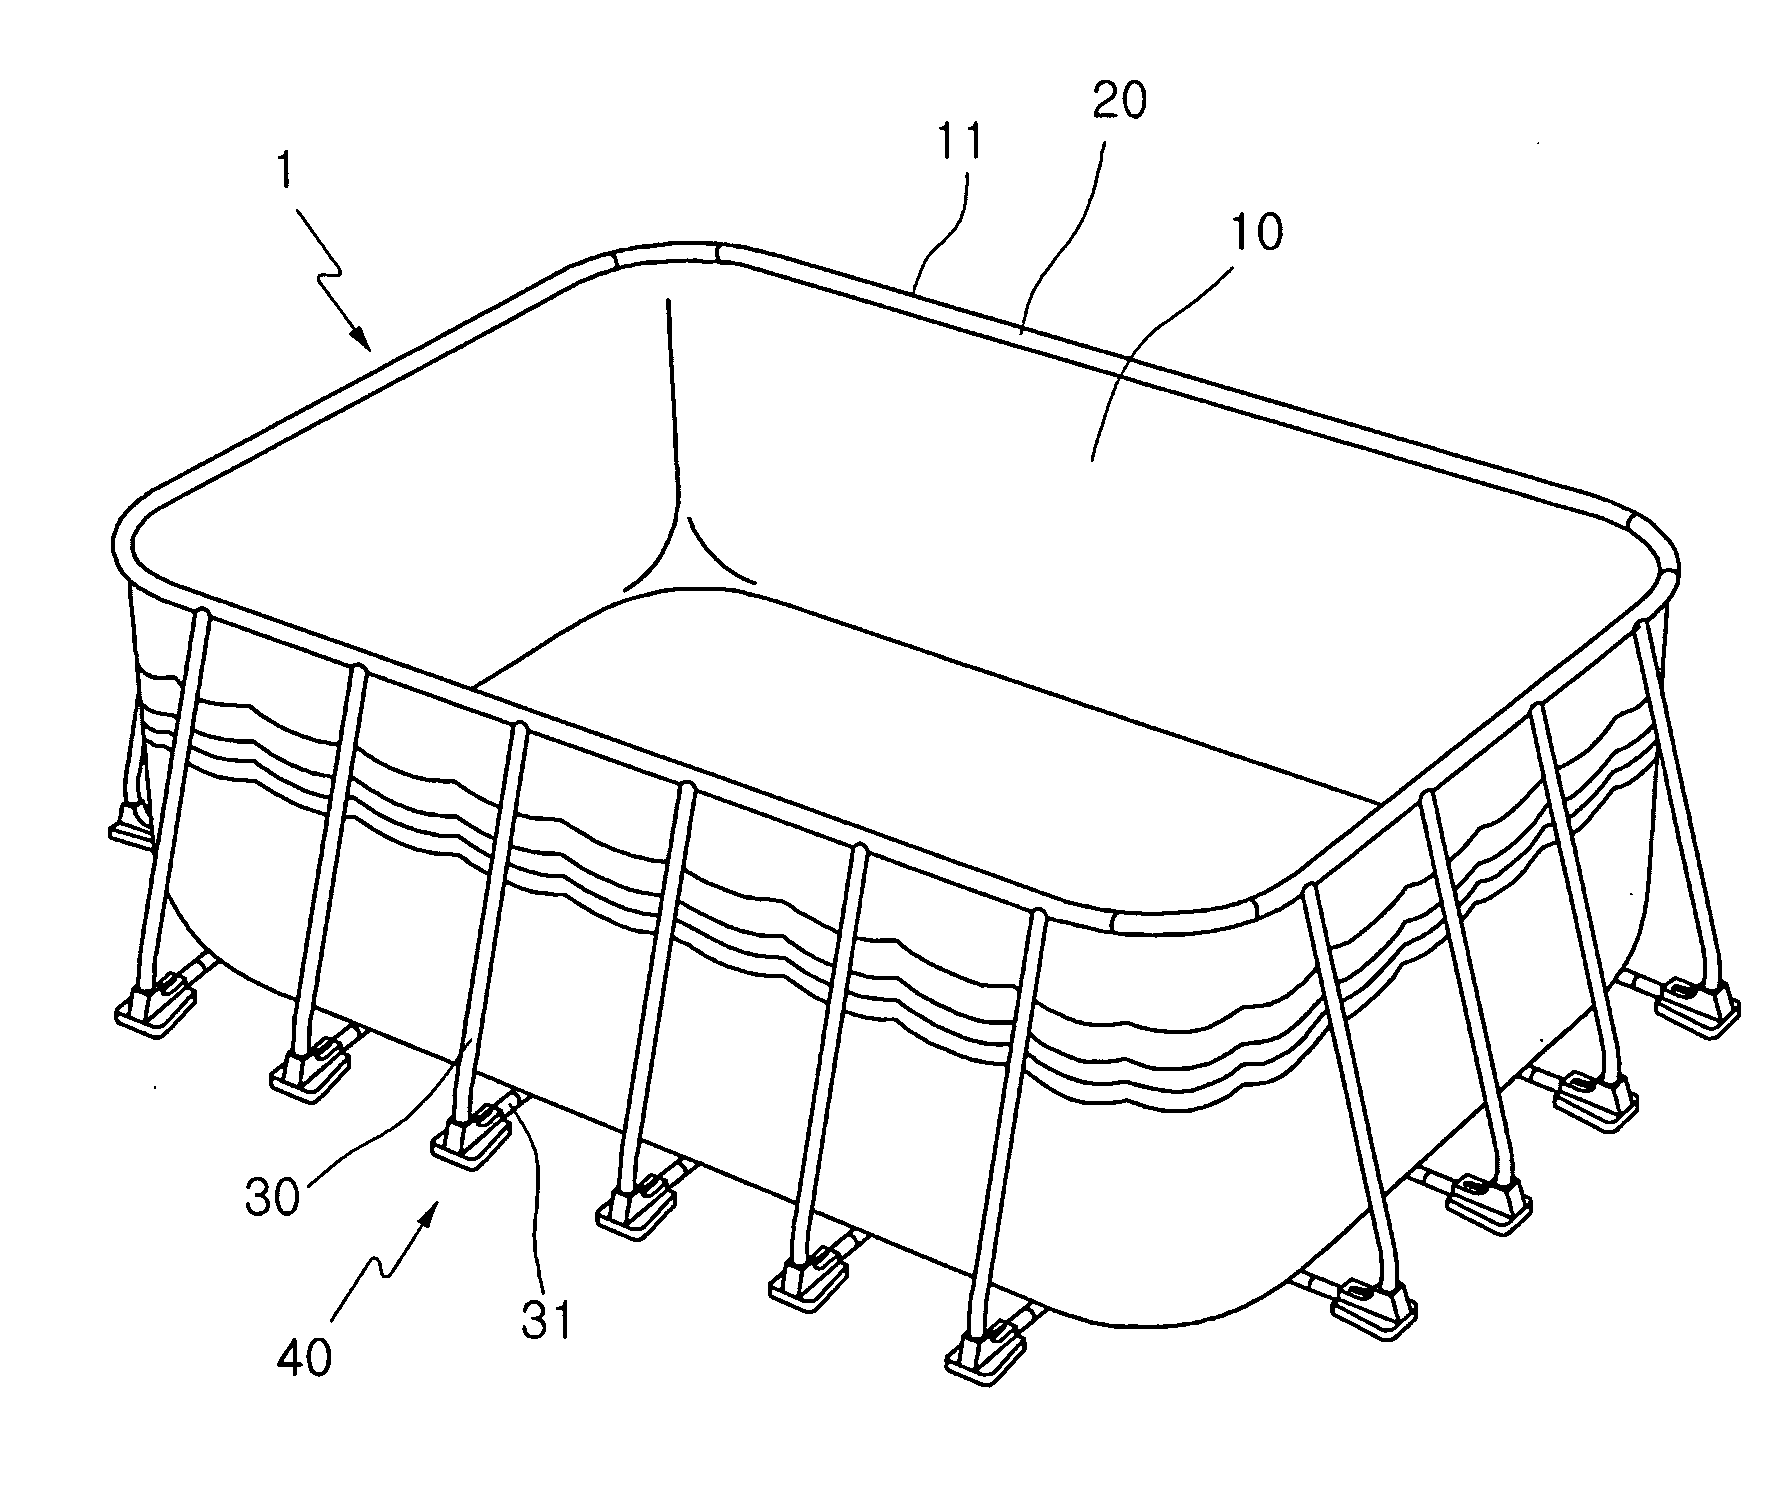 Support frame unit for swimming pool assembly